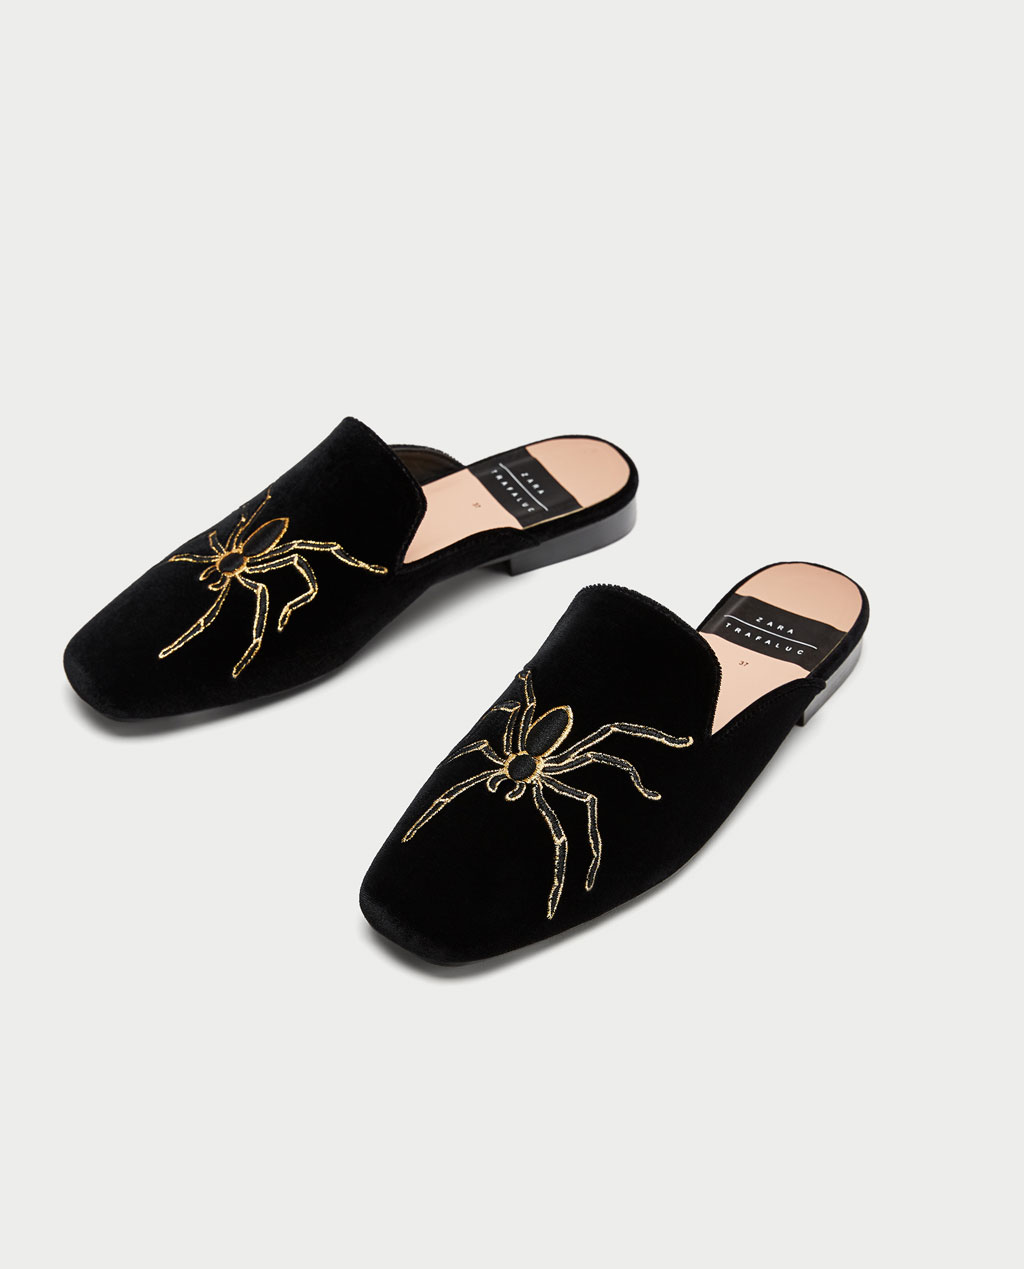 Zara Mule Loafers Style Apotheca